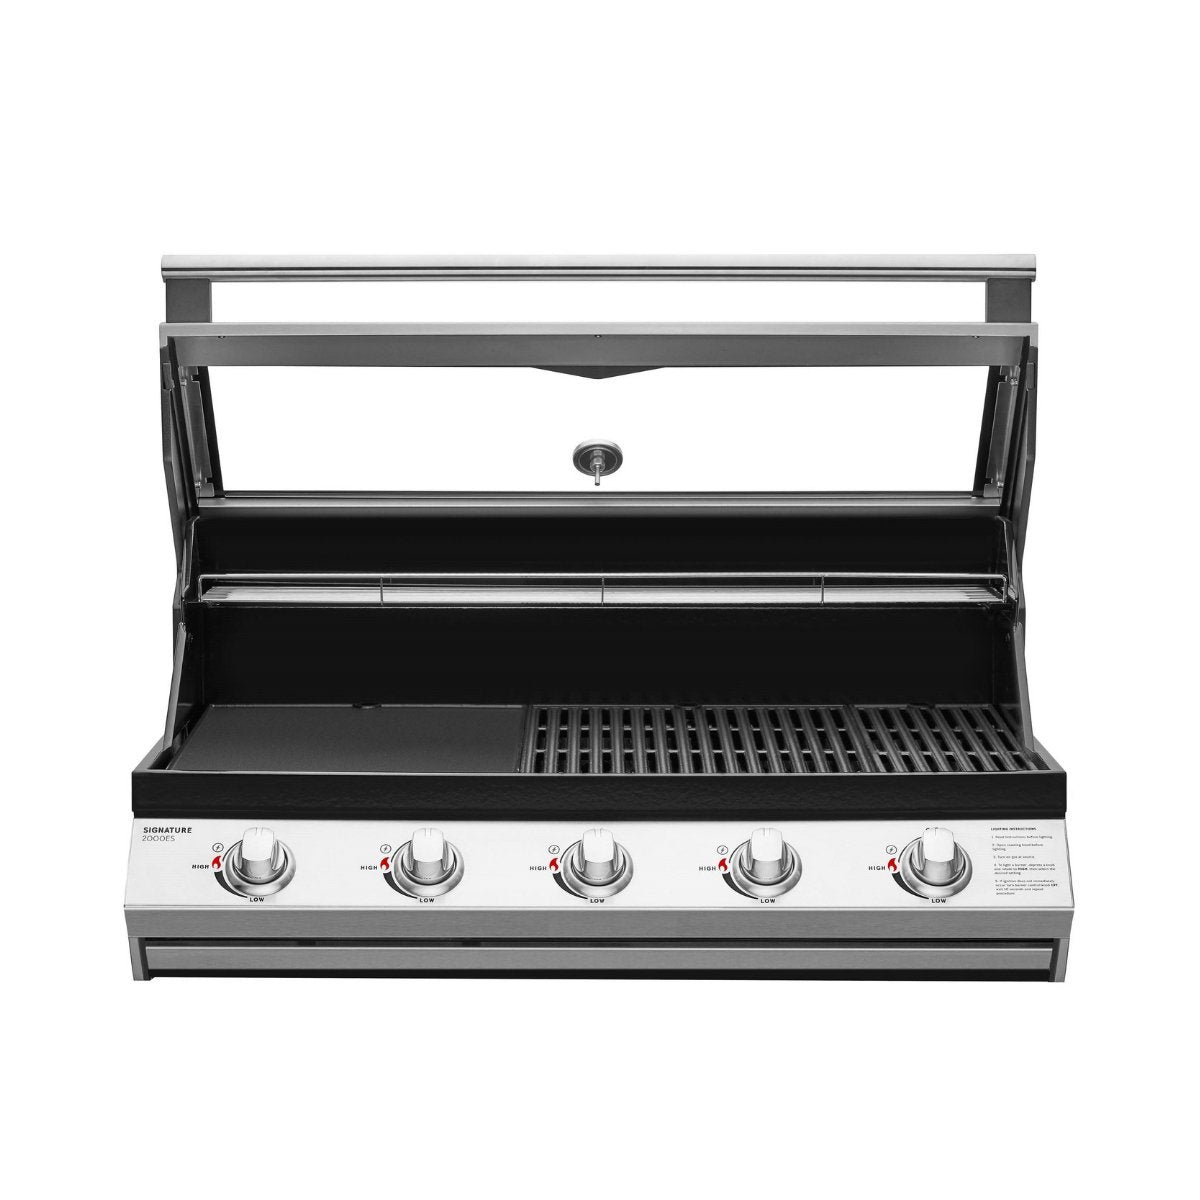 Beefeater 1500 5 Burner Built-In Grill - Kitchen In The Garden